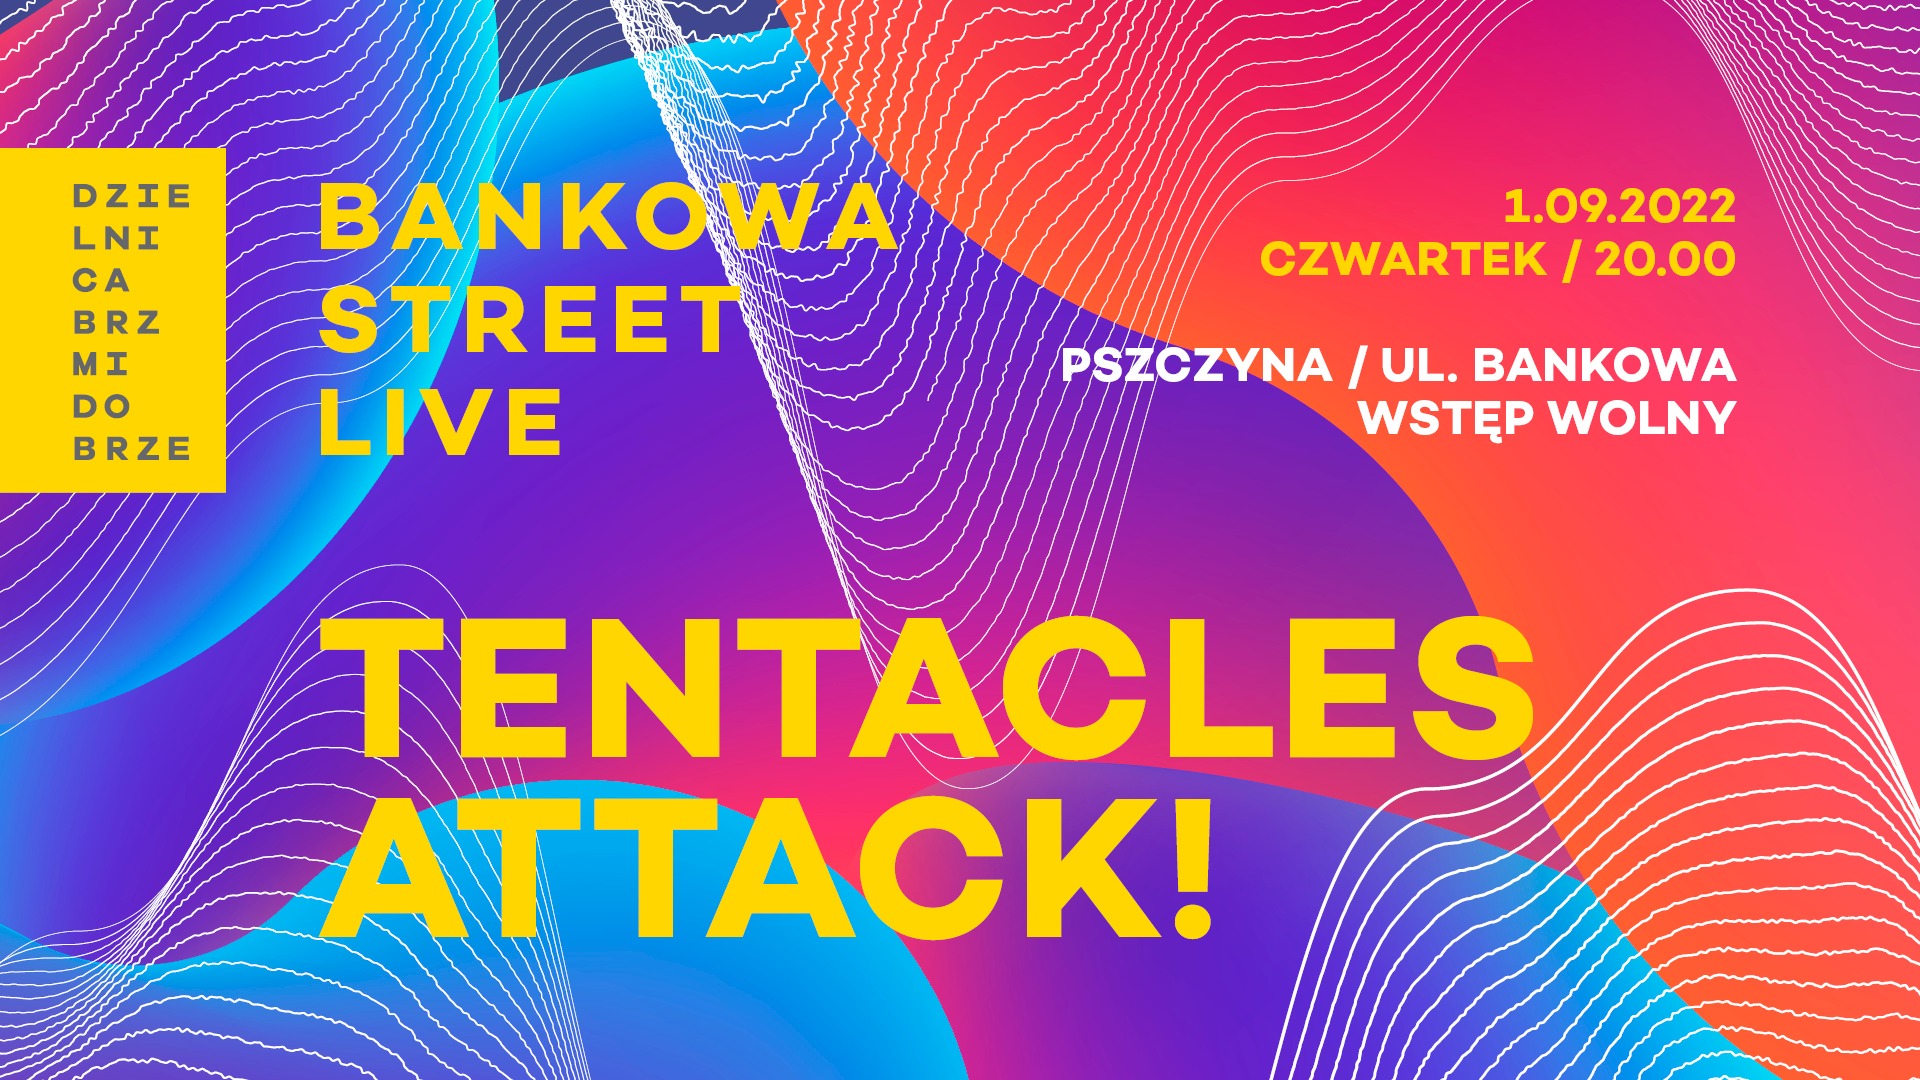 Bankowa Street Live: Tentacles Attack